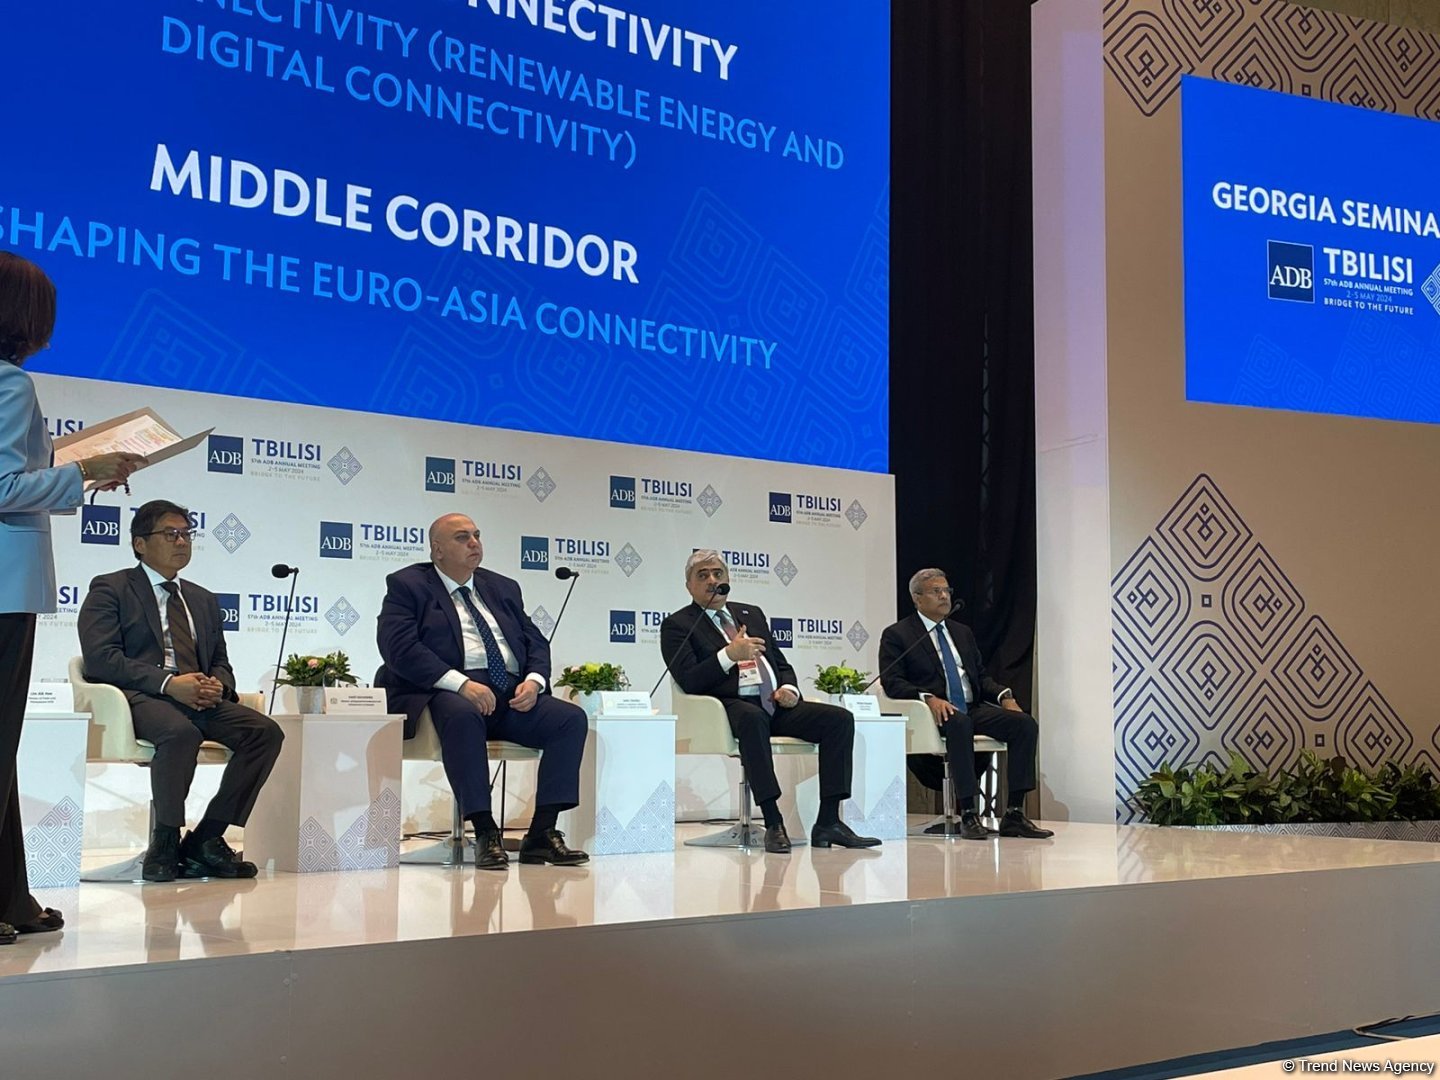 Digitalization emerges as must for customs procedures - Azerbaijani minister